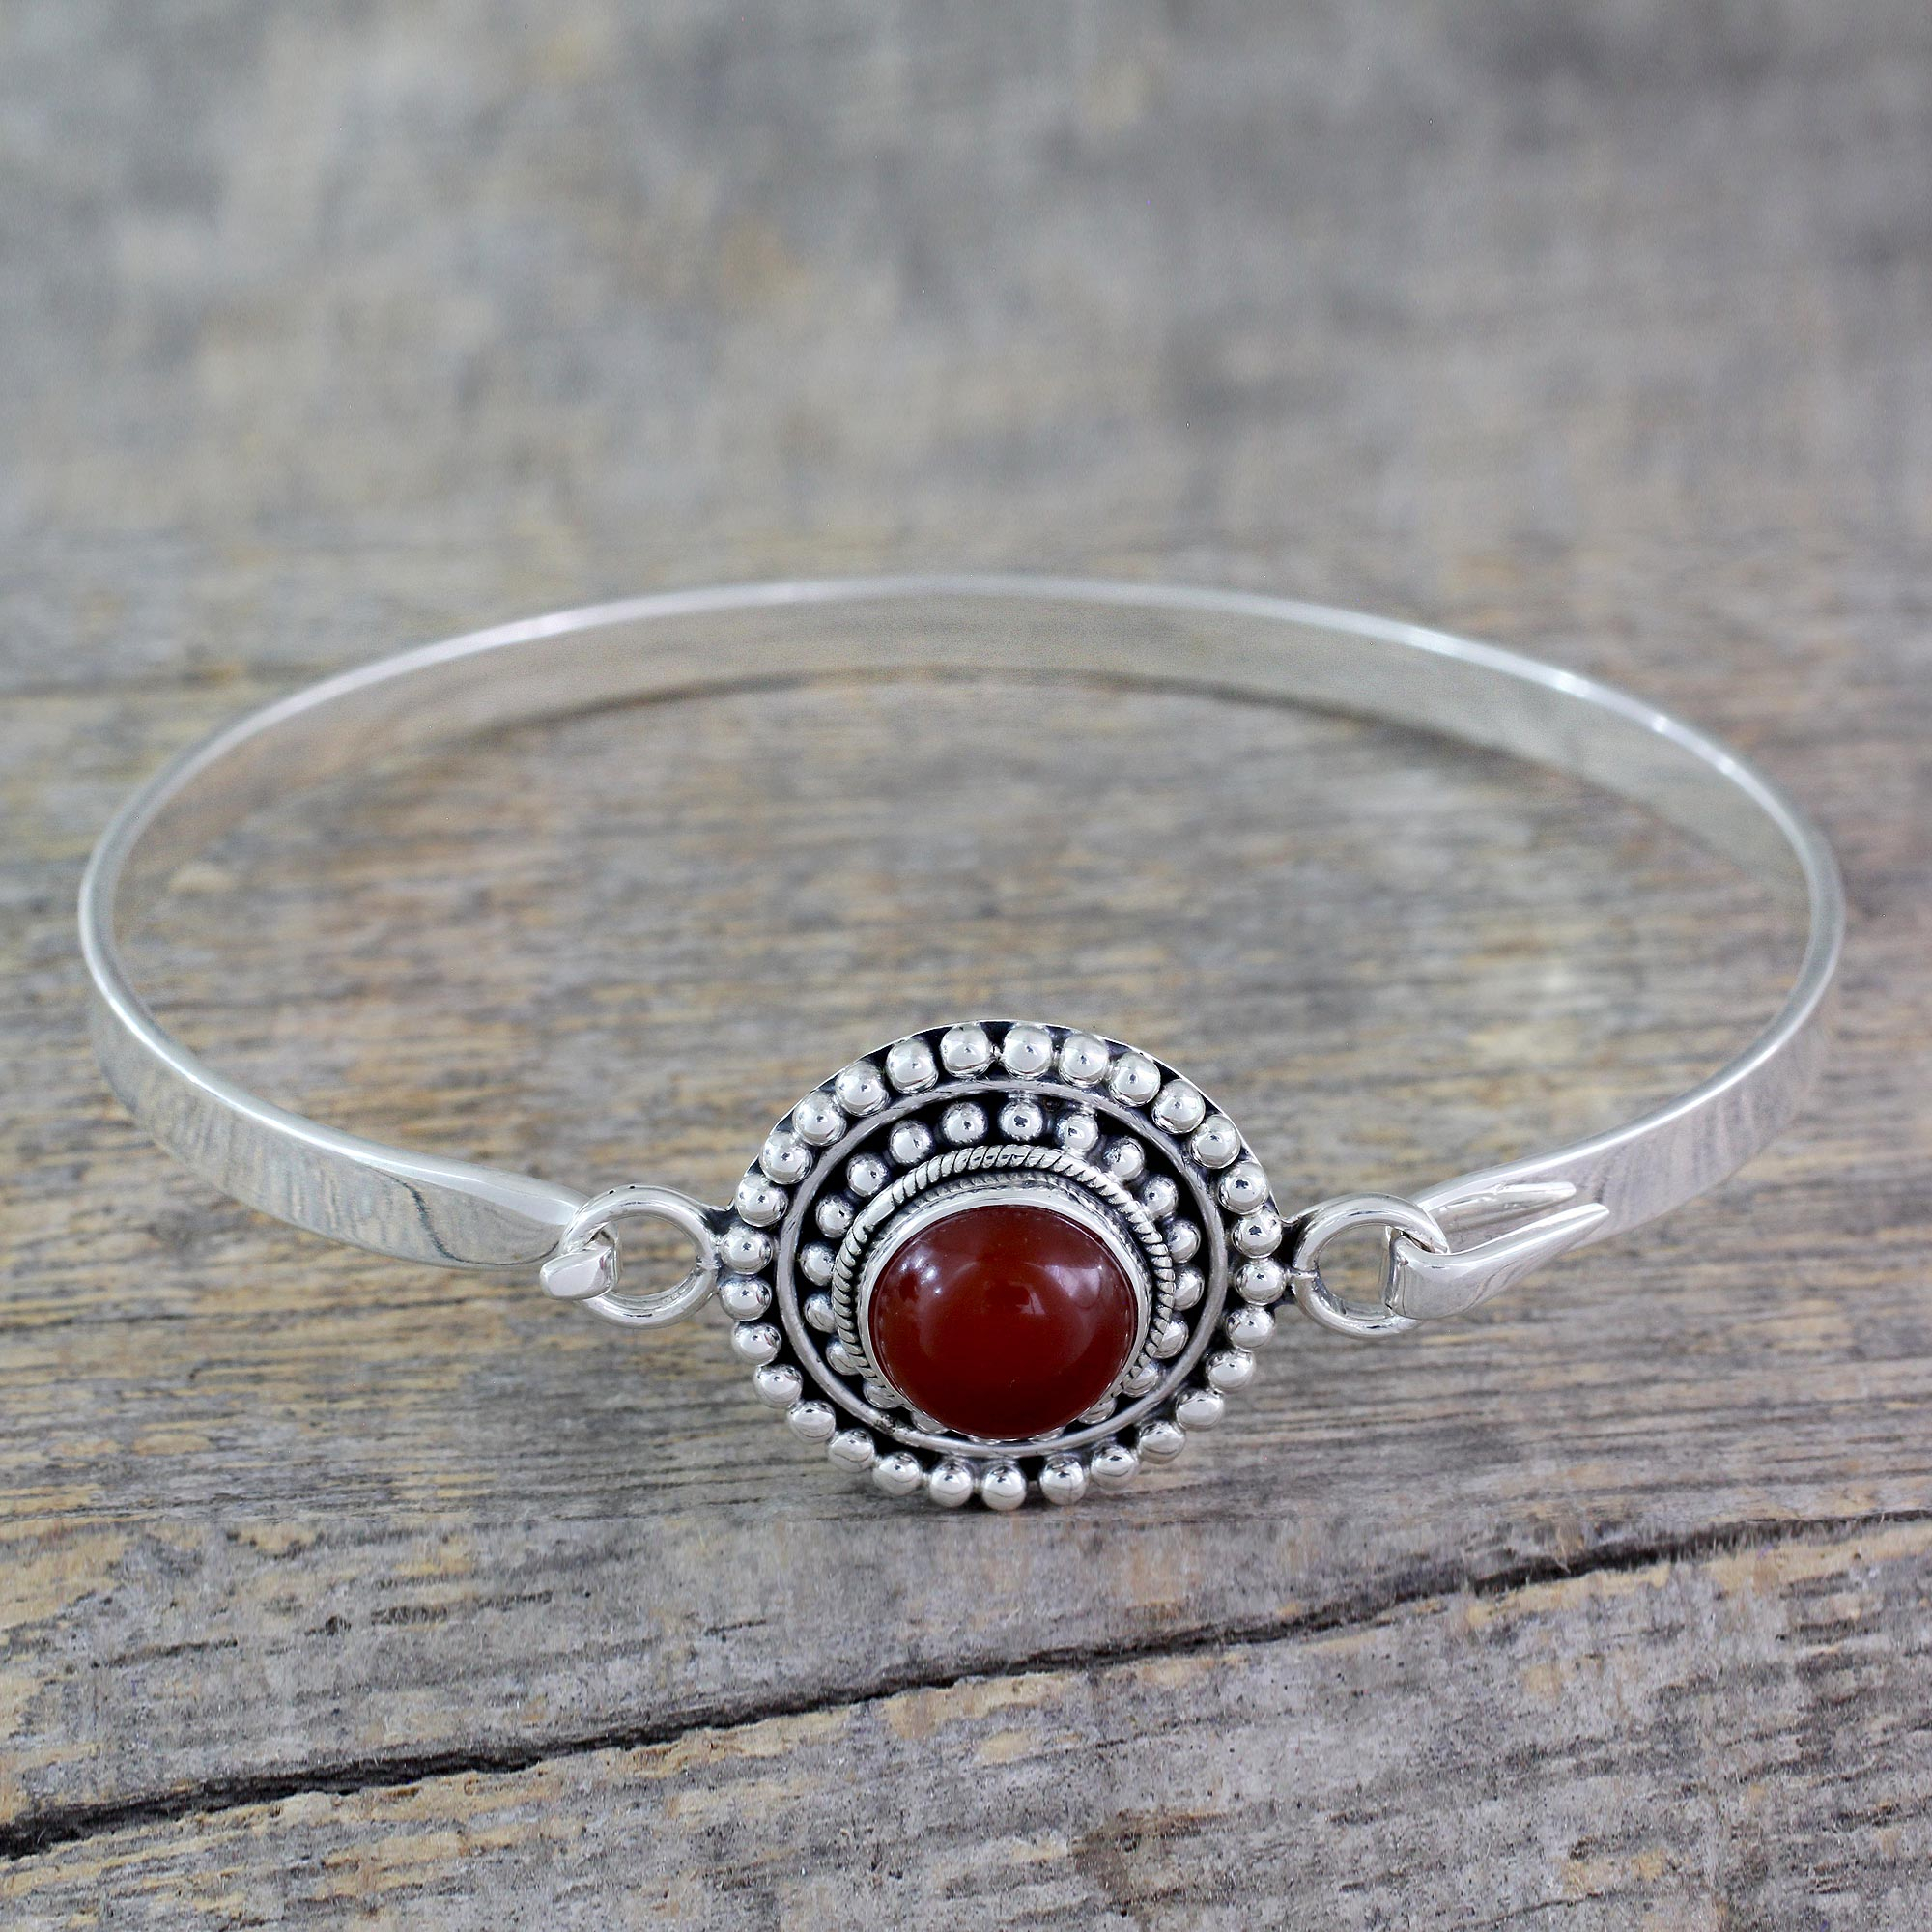 Handcrafted Carnelian and Sterling Silver Bangle Bracelet, 'Passionately'